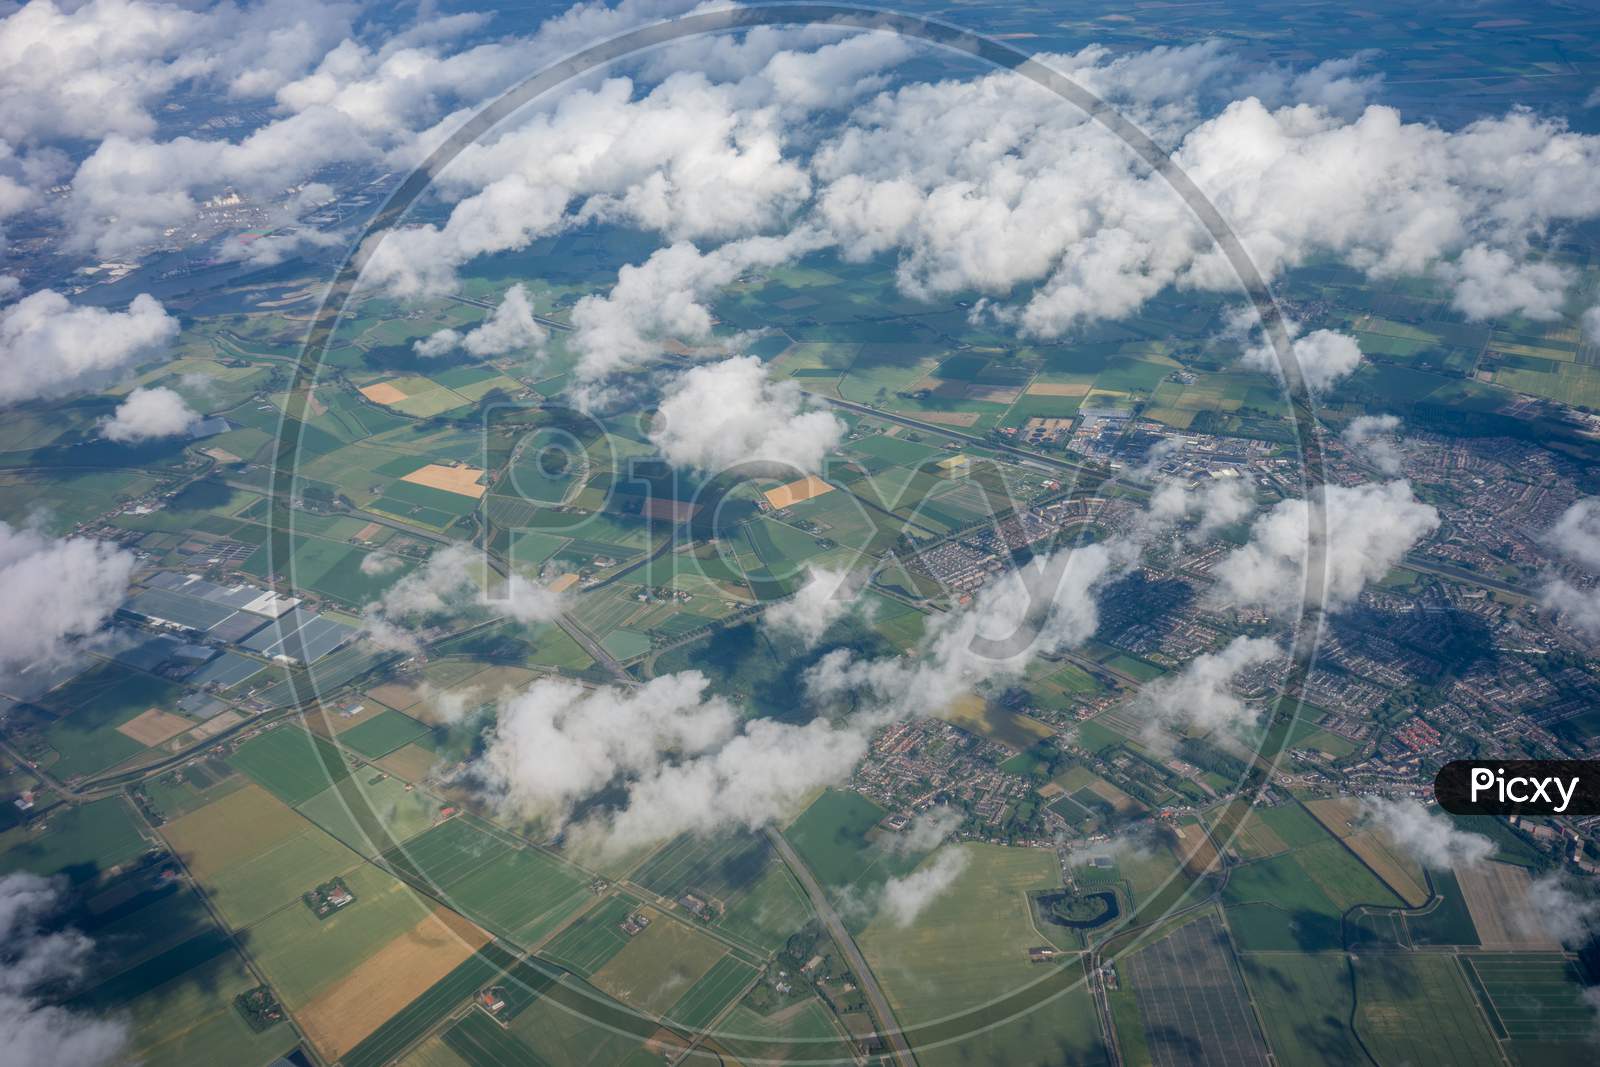 Farms In Holland, Netherlands With Canal Viewed From Plane In Sky With Clouds